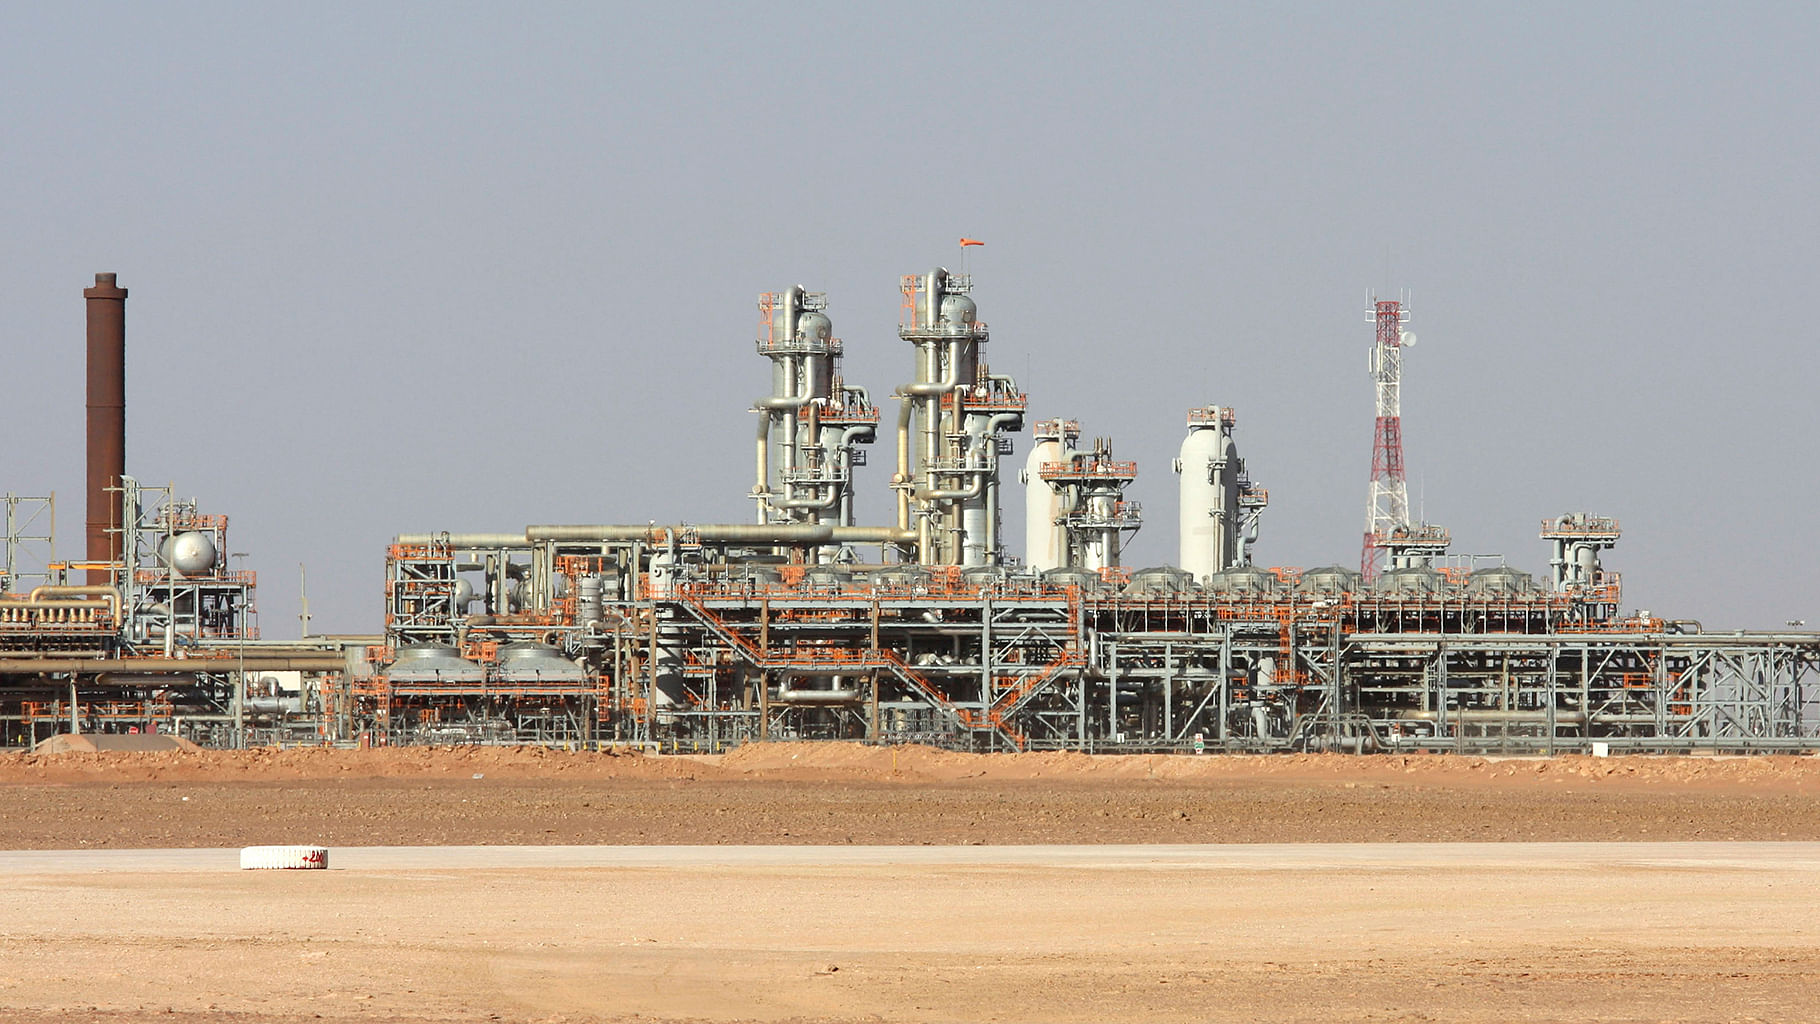 The Krechba gas plant that was attacked, on the In Salah gas field in Algeria’s
Sahara Desert. (Photo: AP)